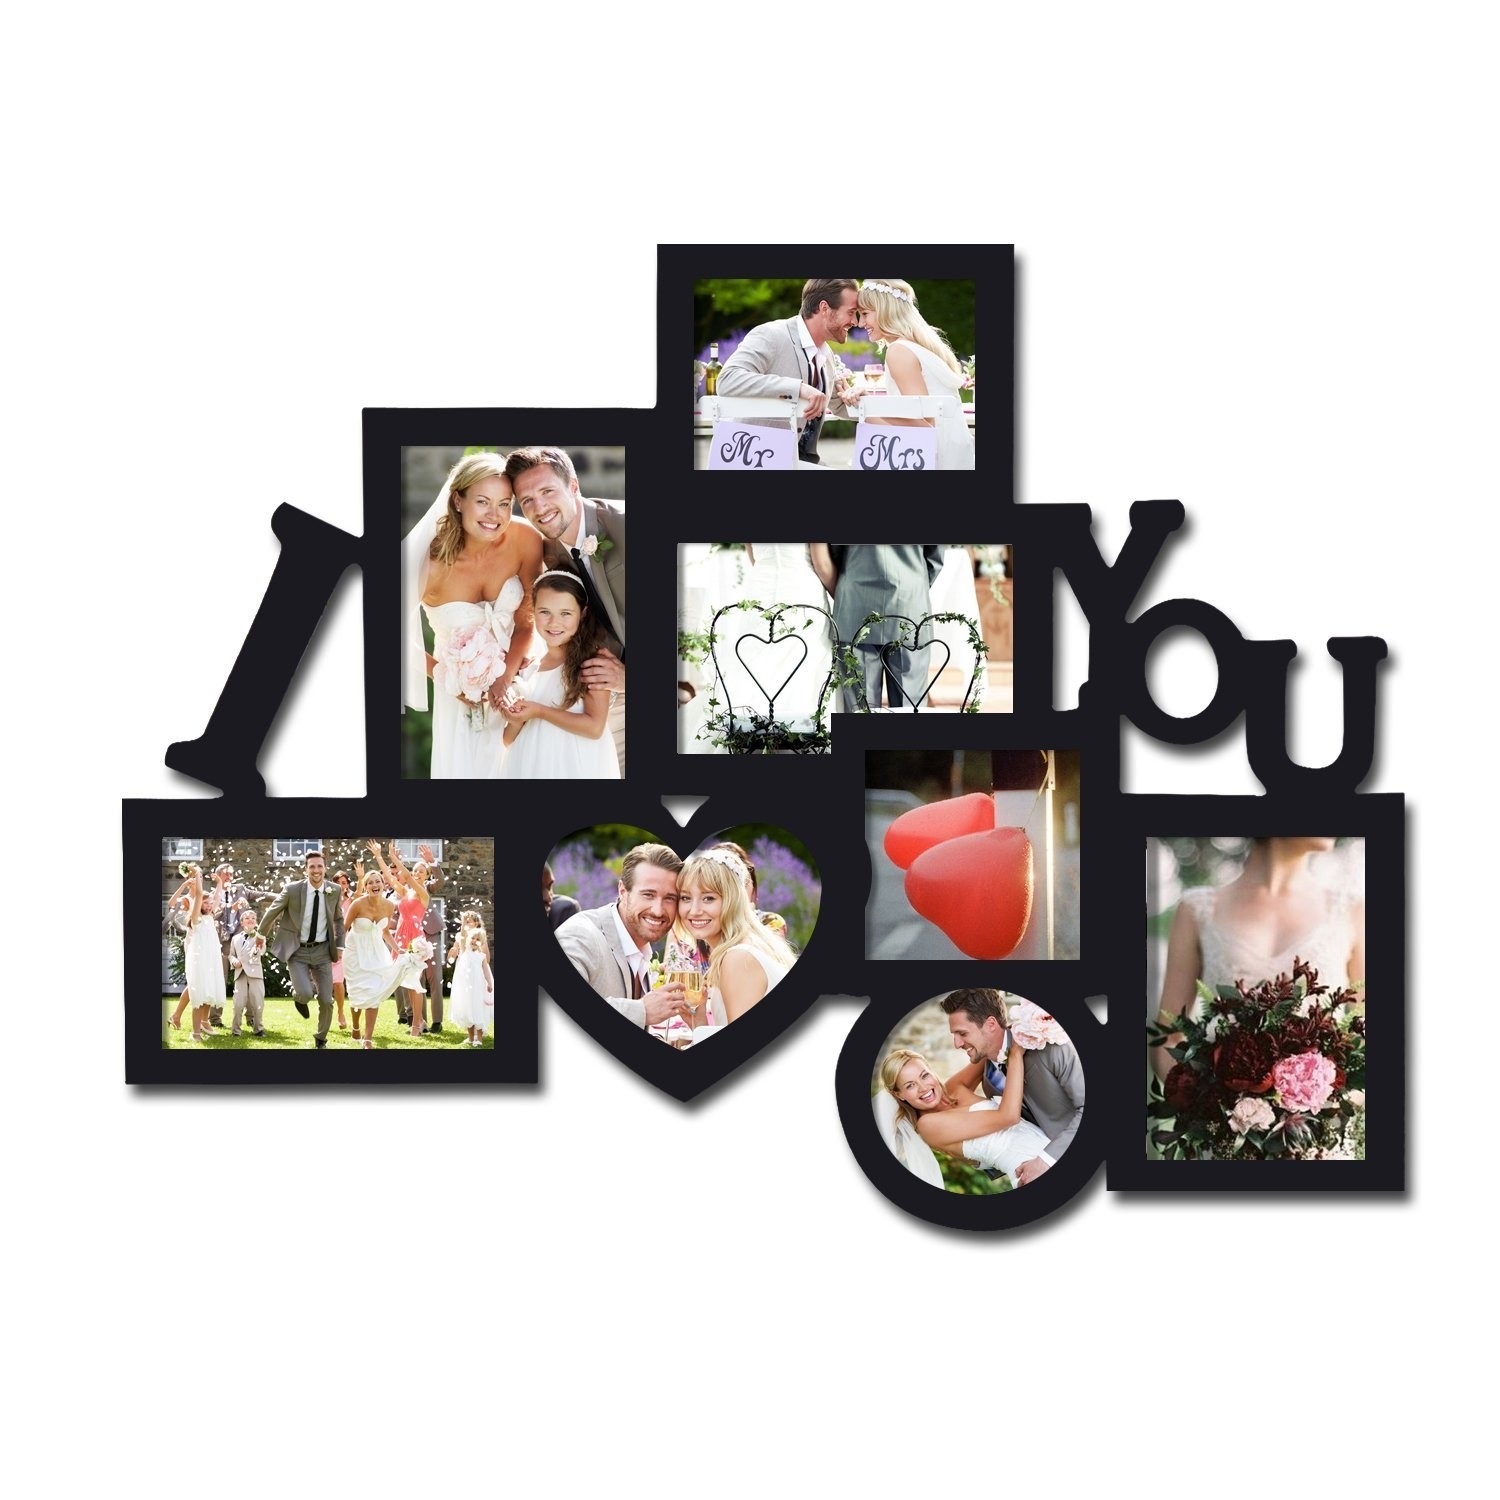 Adeco Decorative Black Wood "I Heart You" Wall Hanging Collage Picture Photo Frame, 8 Openings, Various Sizes